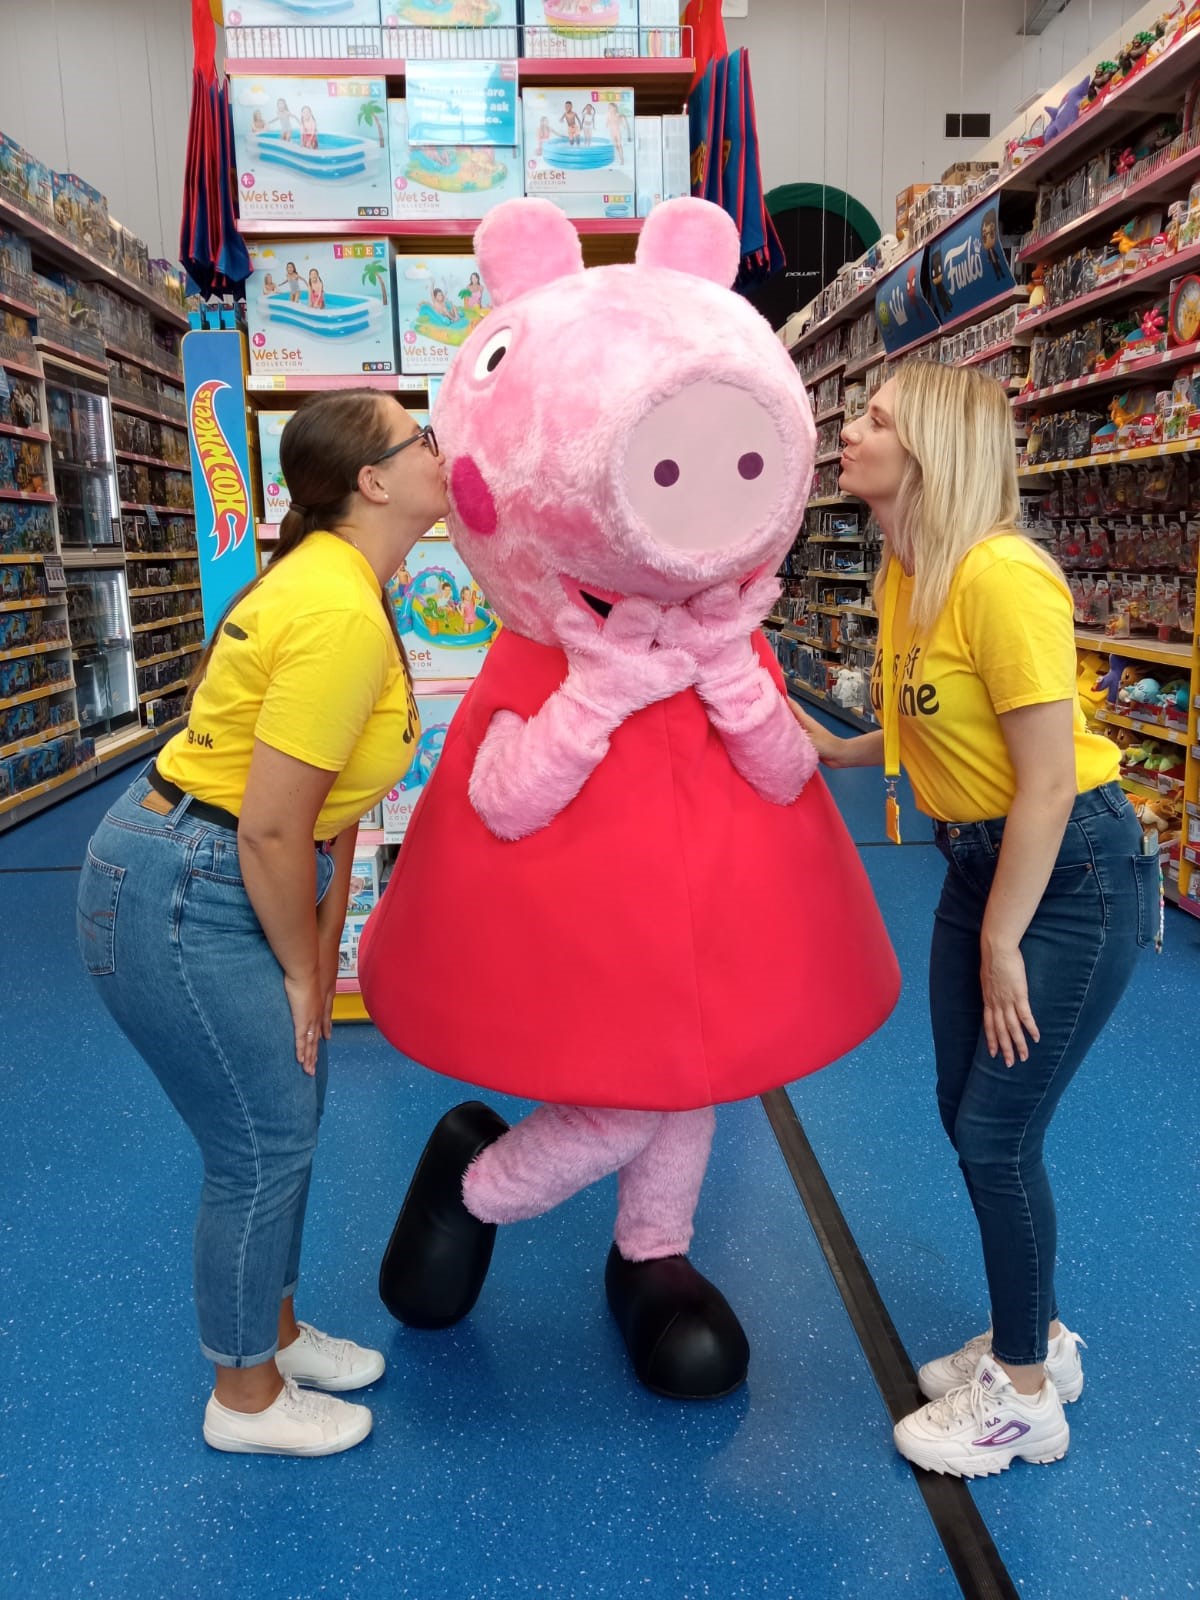 Smyths Toys Announces Partnership Renewal with Rays of Sunshine Children’s Charity